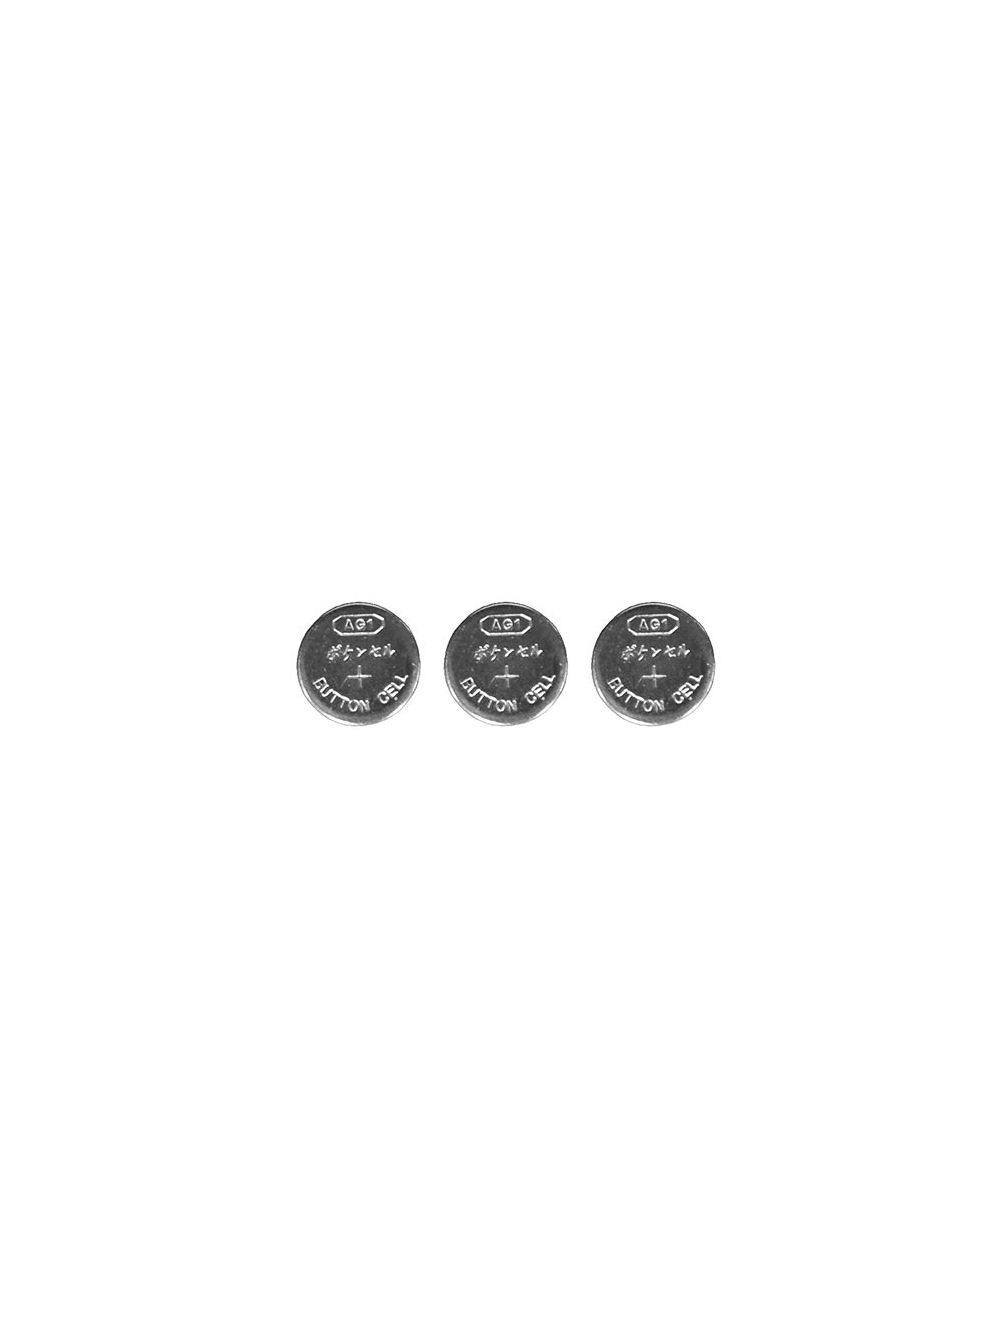 1.5V SR60 Replacement Batteries (3-Pack)